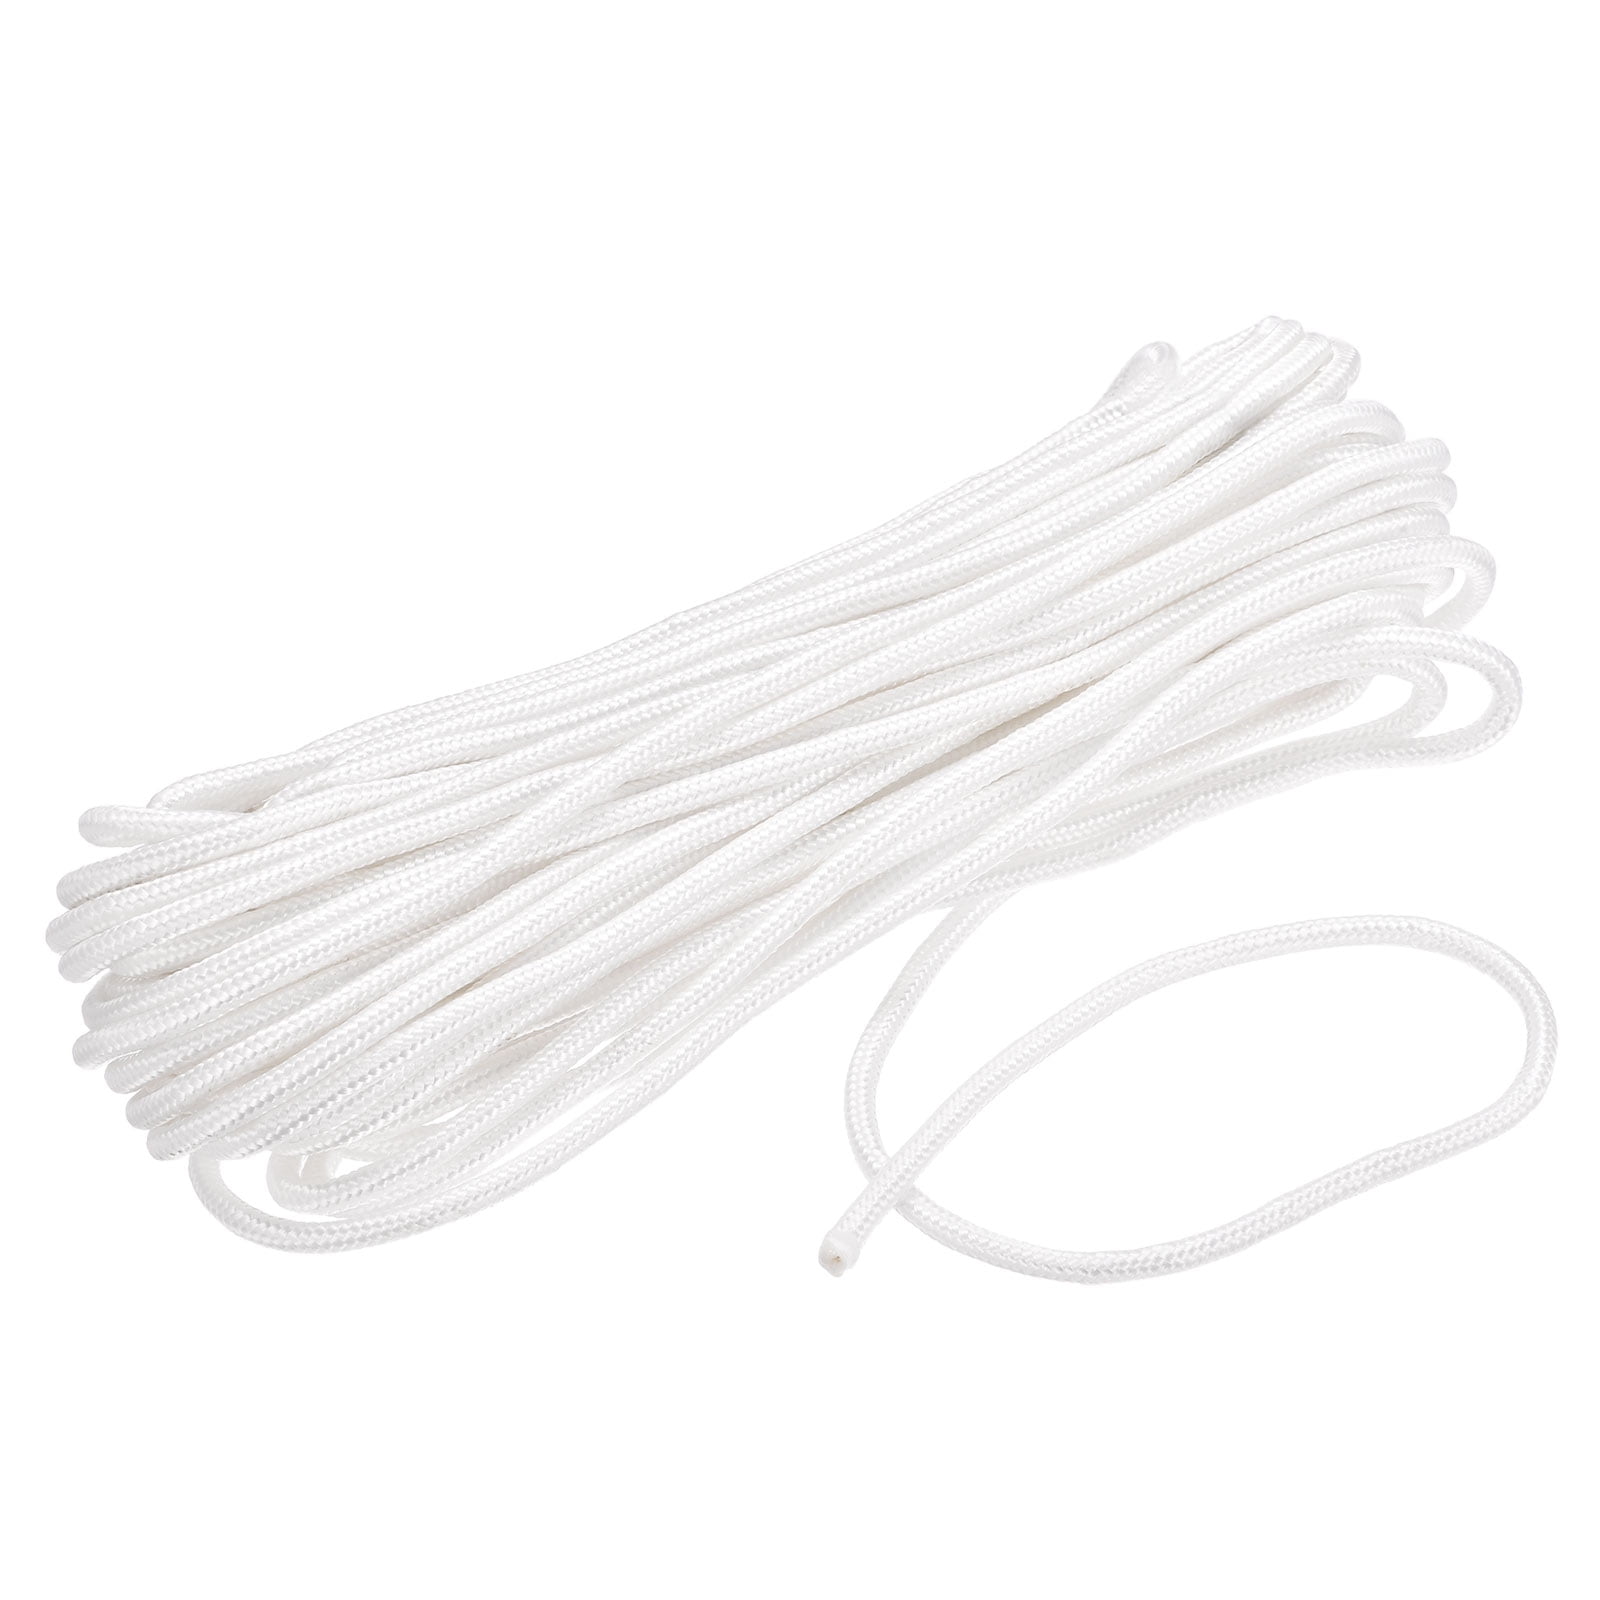 Uxcell Nylon Rope Solid Braided 1 Roll of 0.19 inch x 49.2 Foot White, Size: 5mm x 15m